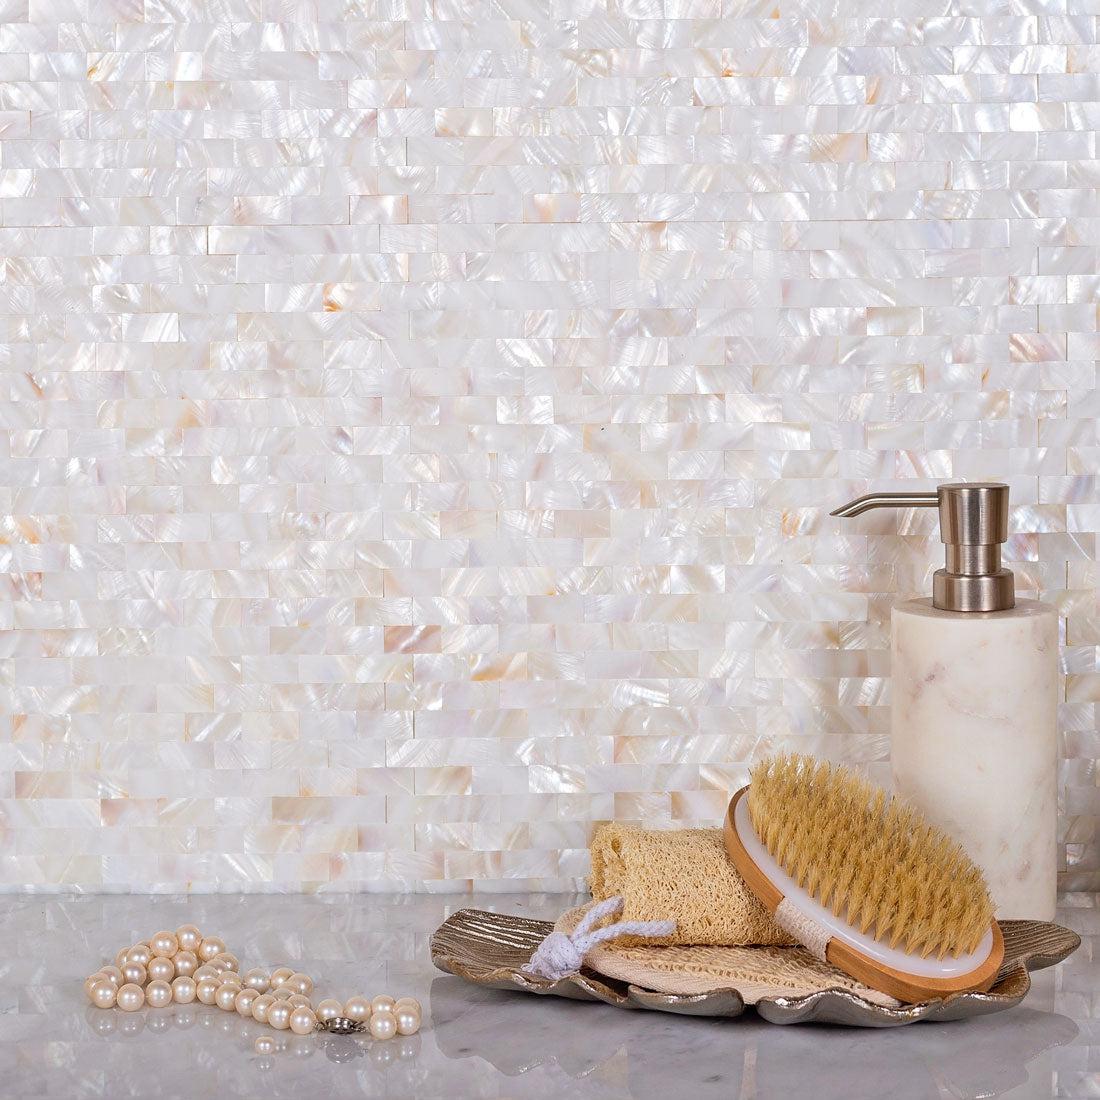  Pure White Mother Of Pearl Brick Mosaic Tile